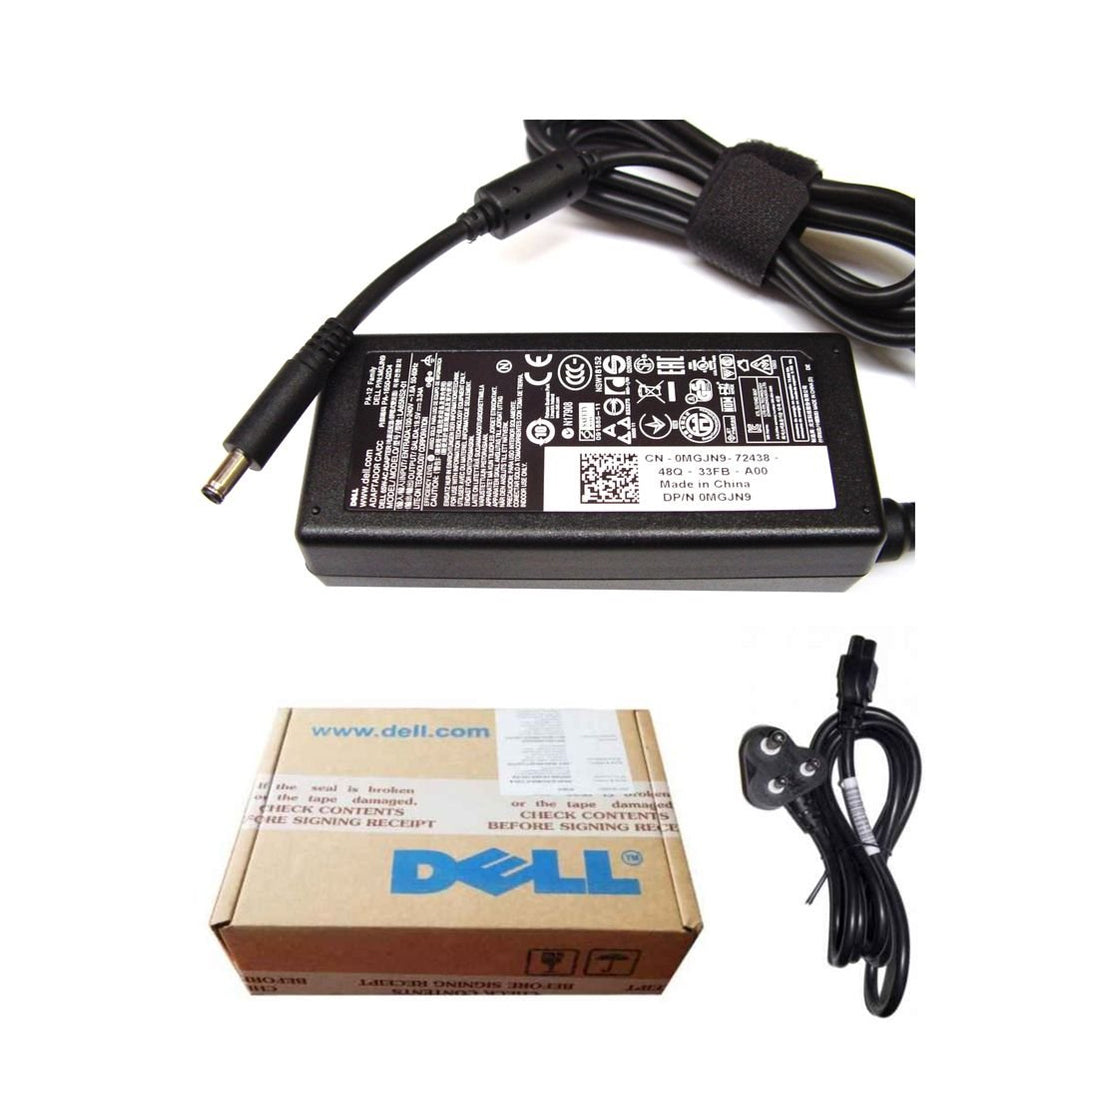 Dell Original 65W 19.5V 4.5mm Pin Laptop Charger Adapter for Inspiron 14 3476 With Power Cord